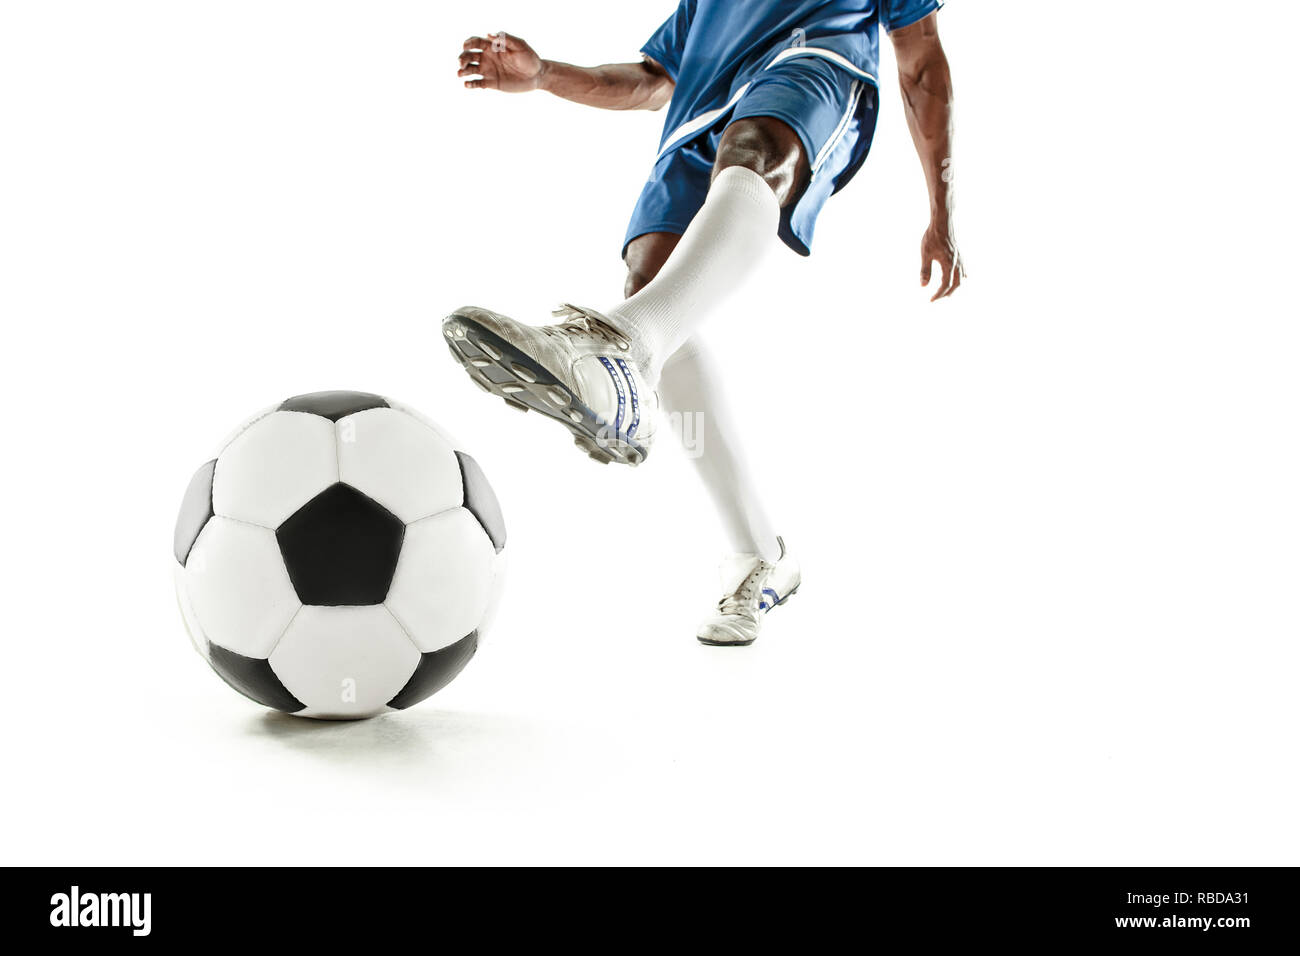 The Legs Of Soccer Player Close Up Isolated On White African American Model In Action Or Movement With Ball The Football Game Sport Player Athlete Competition Concept Stock Photo Alamy